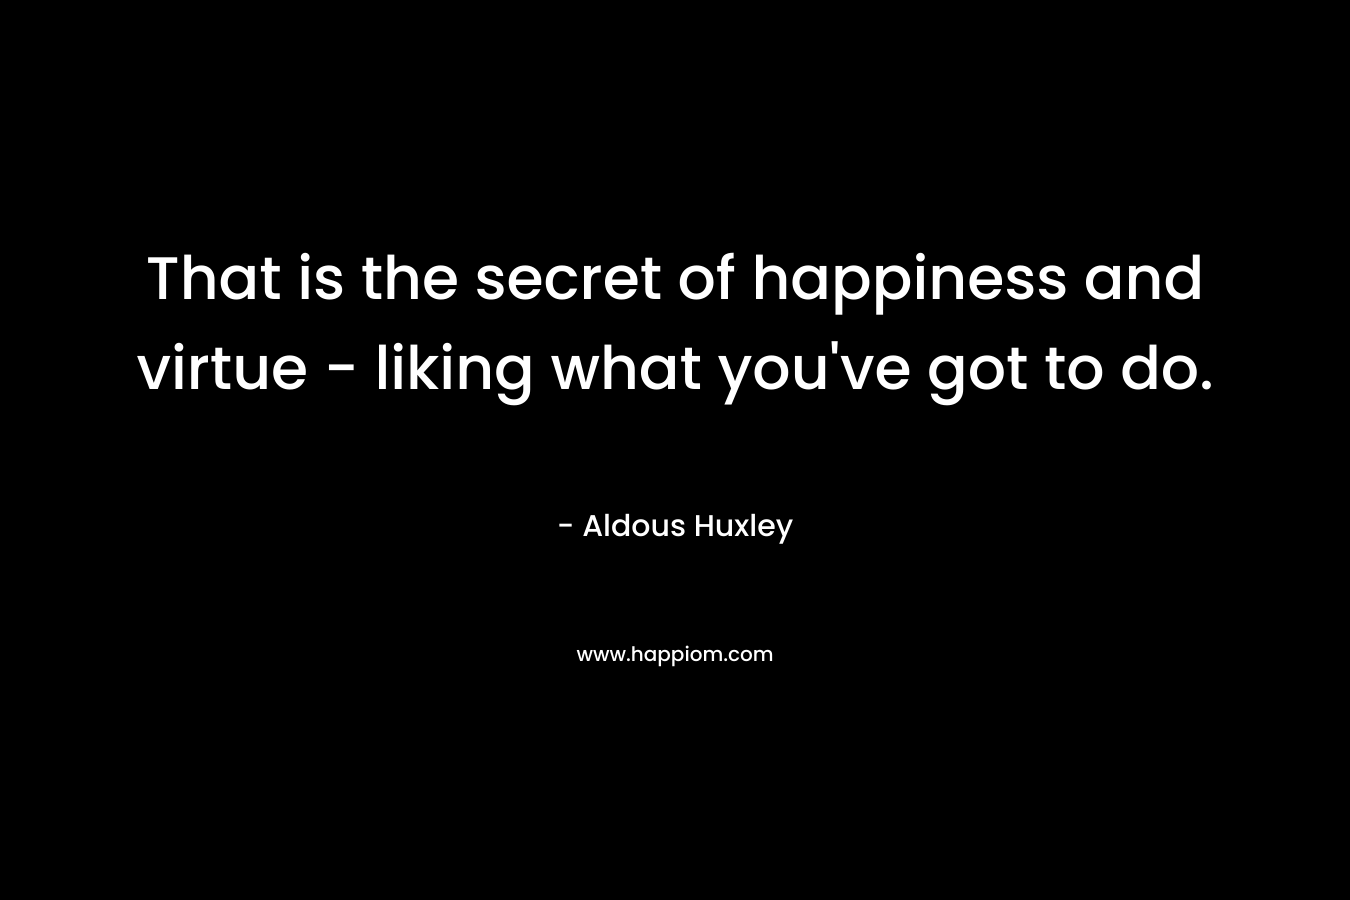 That is the secret of happiness and virtue – liking what you’ve got to do. – Aldous Huxley